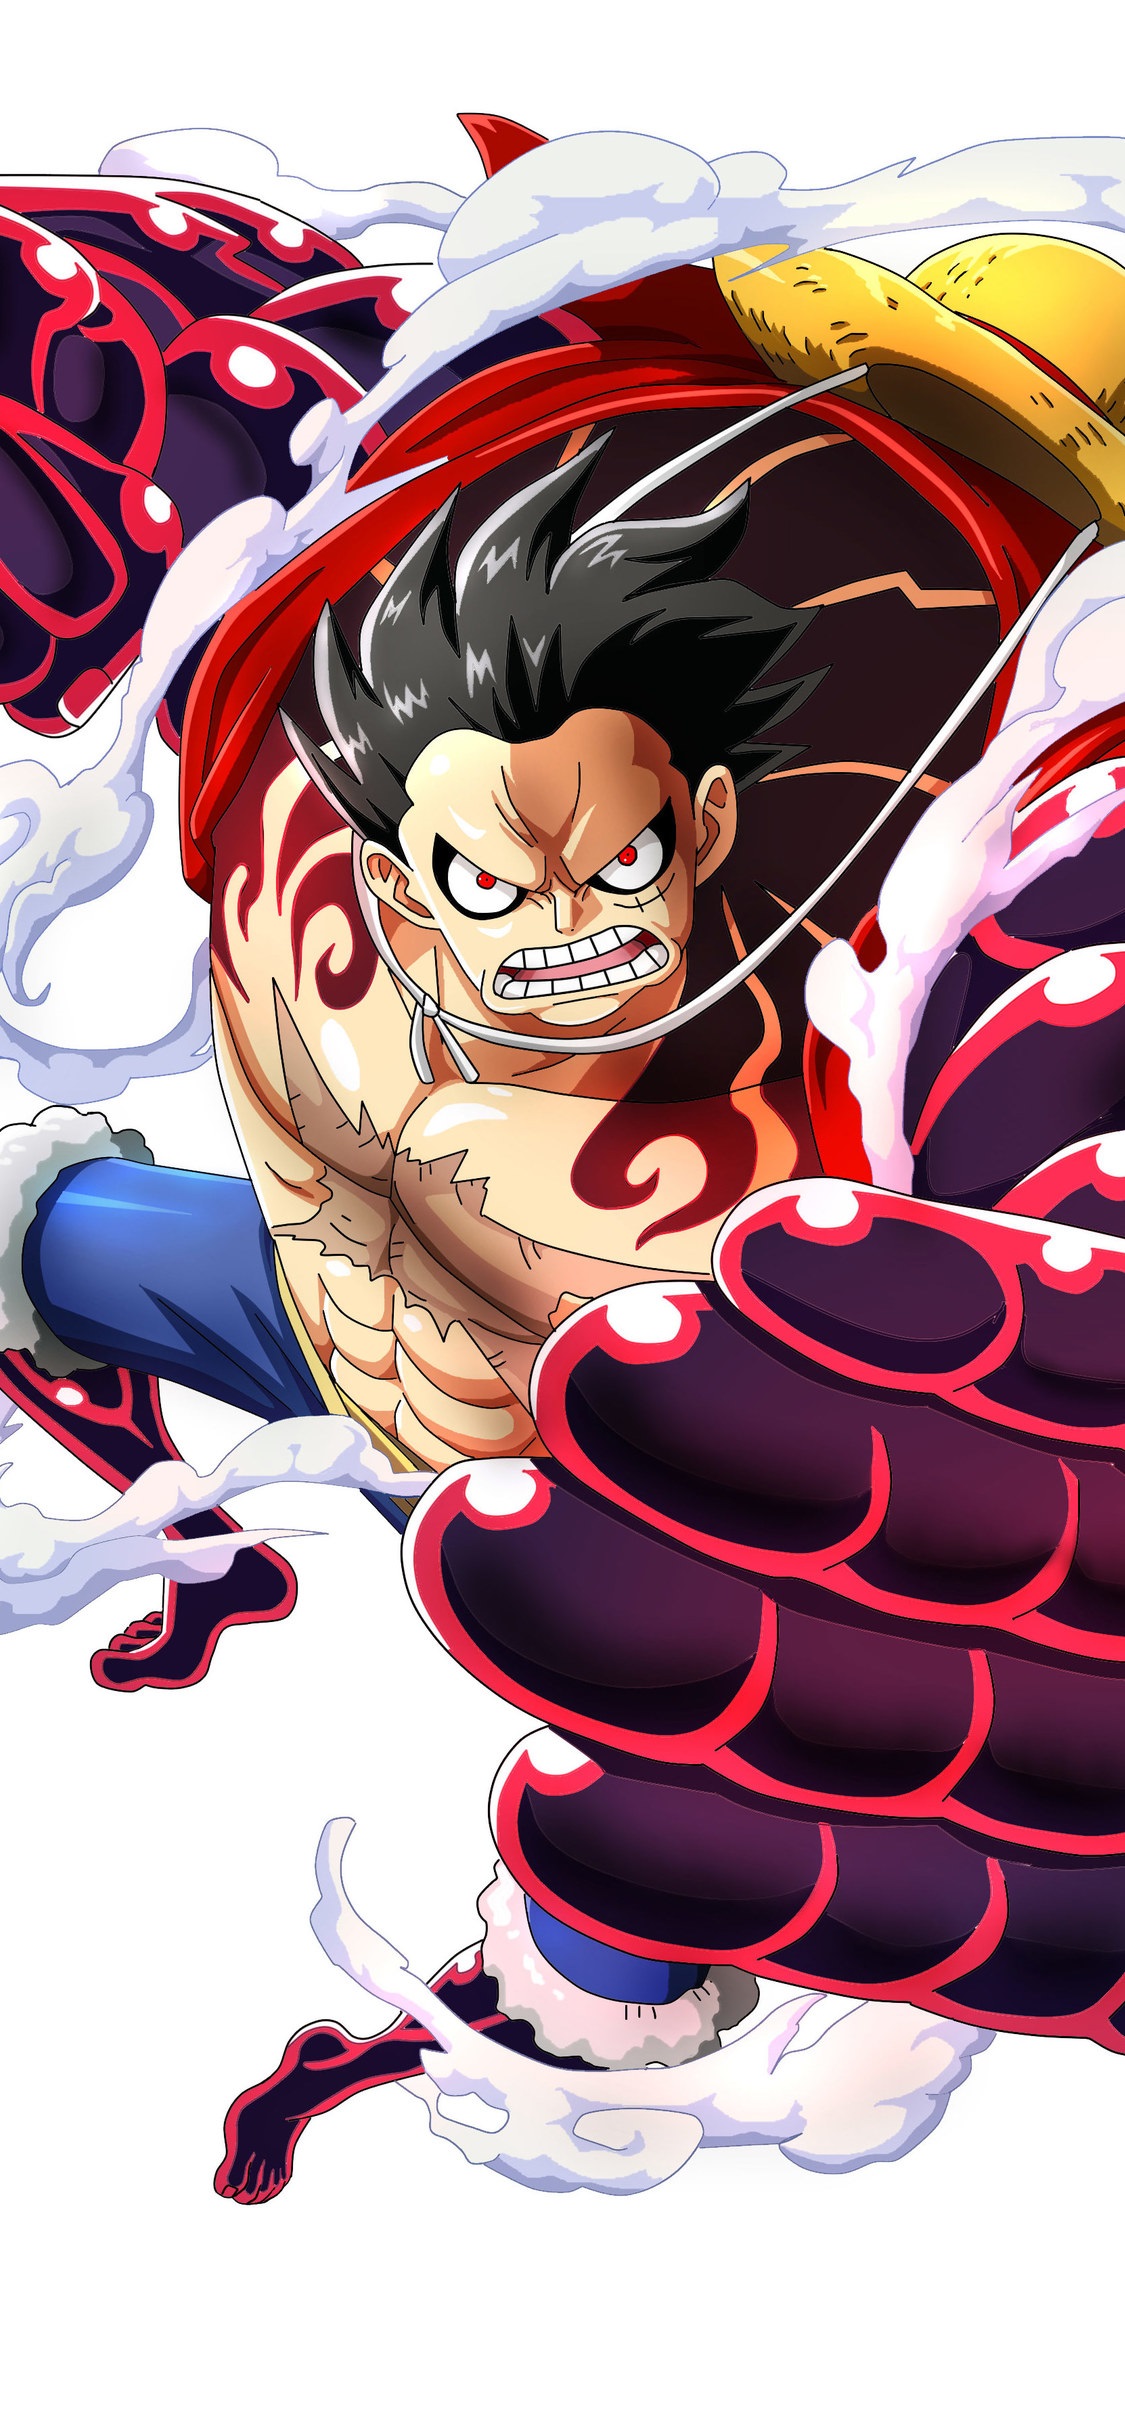 Monkey D Luffy One Piece Pg Iphone X Wallpaper - One Piece Wallpaper Iphone X - HD Wallpaper 